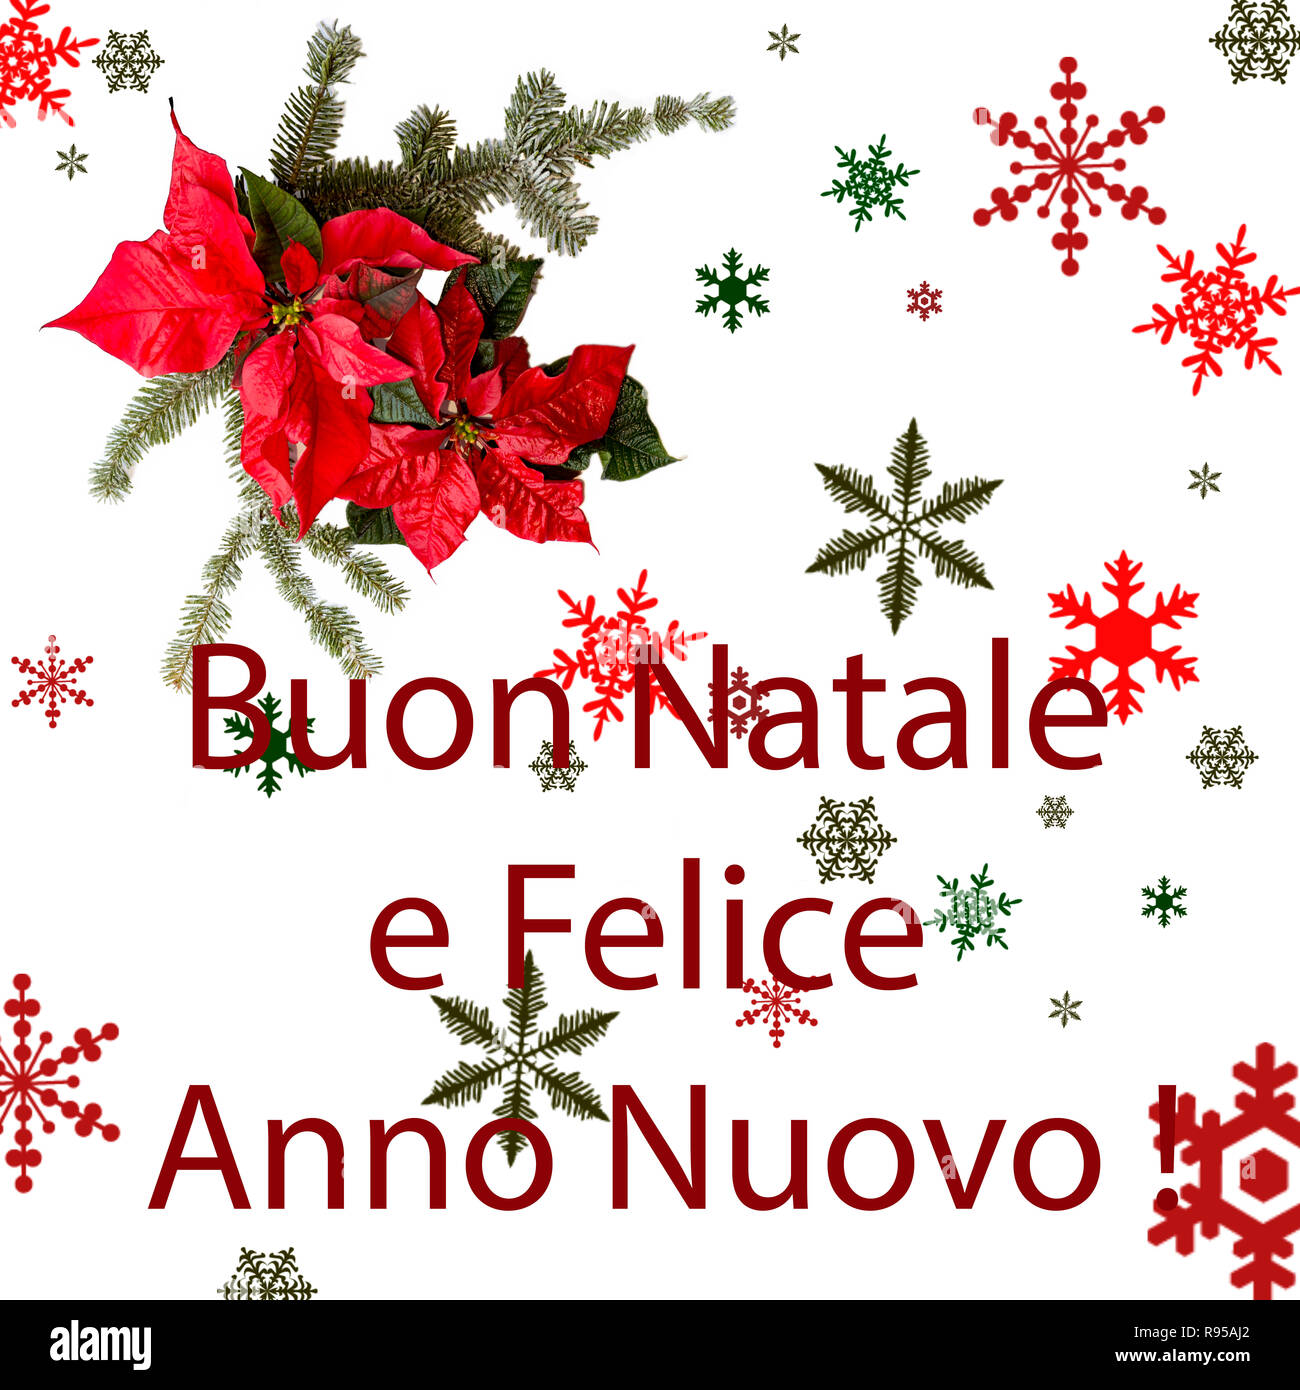 Buon Natale Card.Poinsettia Flower With Fir Tree And Snow On White Background Greetings Christmas Card Postcard Christmastime Red White And Green Buon Natale Stock Photo Alamy